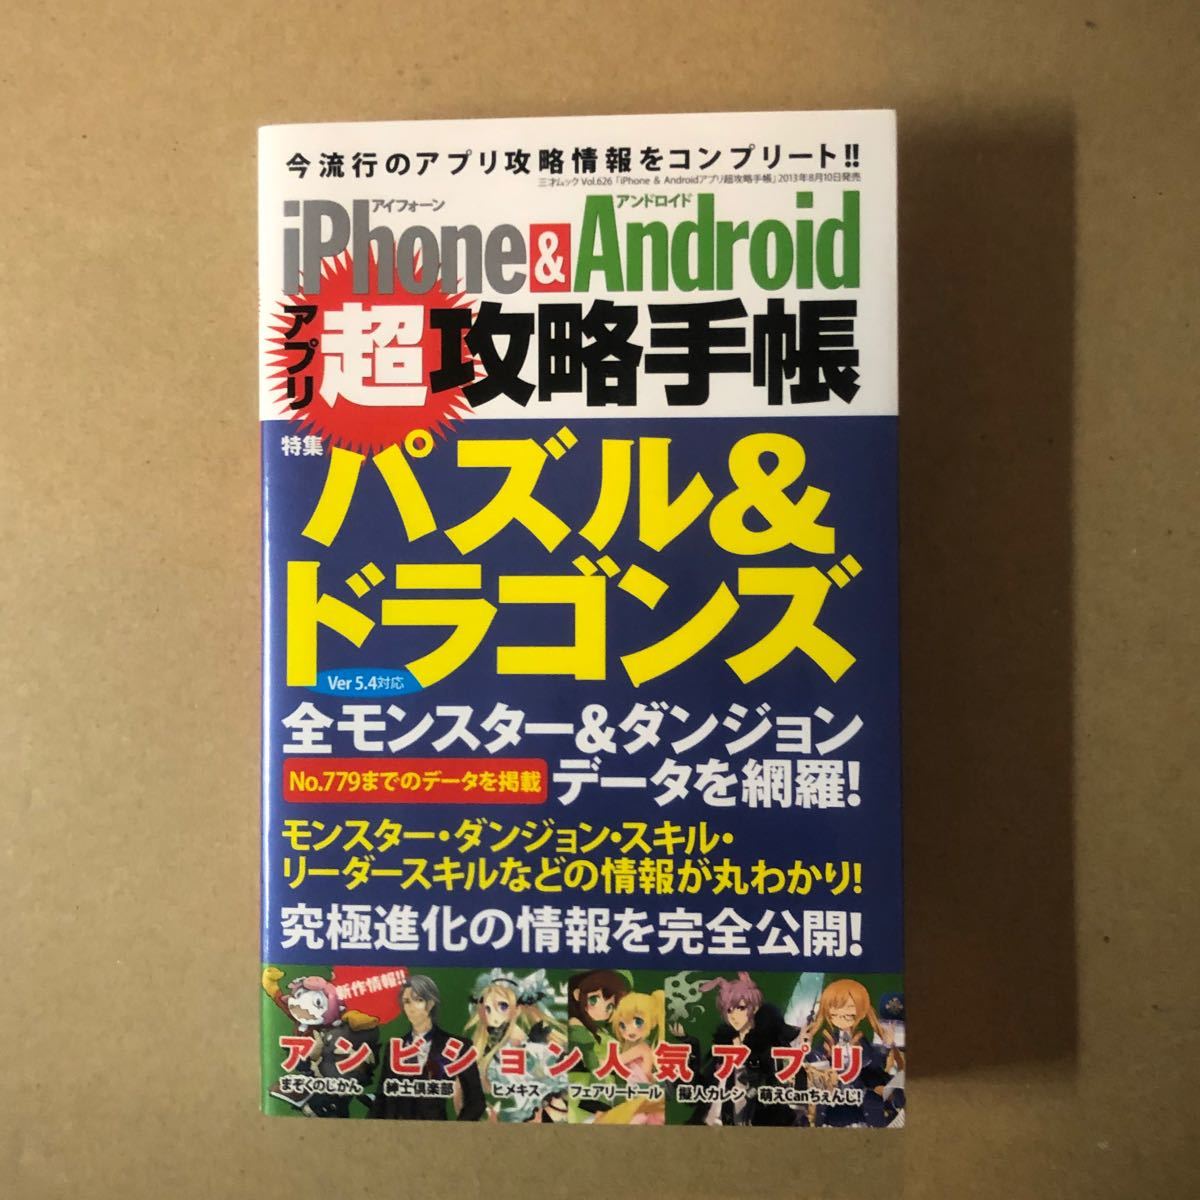 iPhone & Androidアプリ超攻略手帳 : パズドラ大特集!! : …